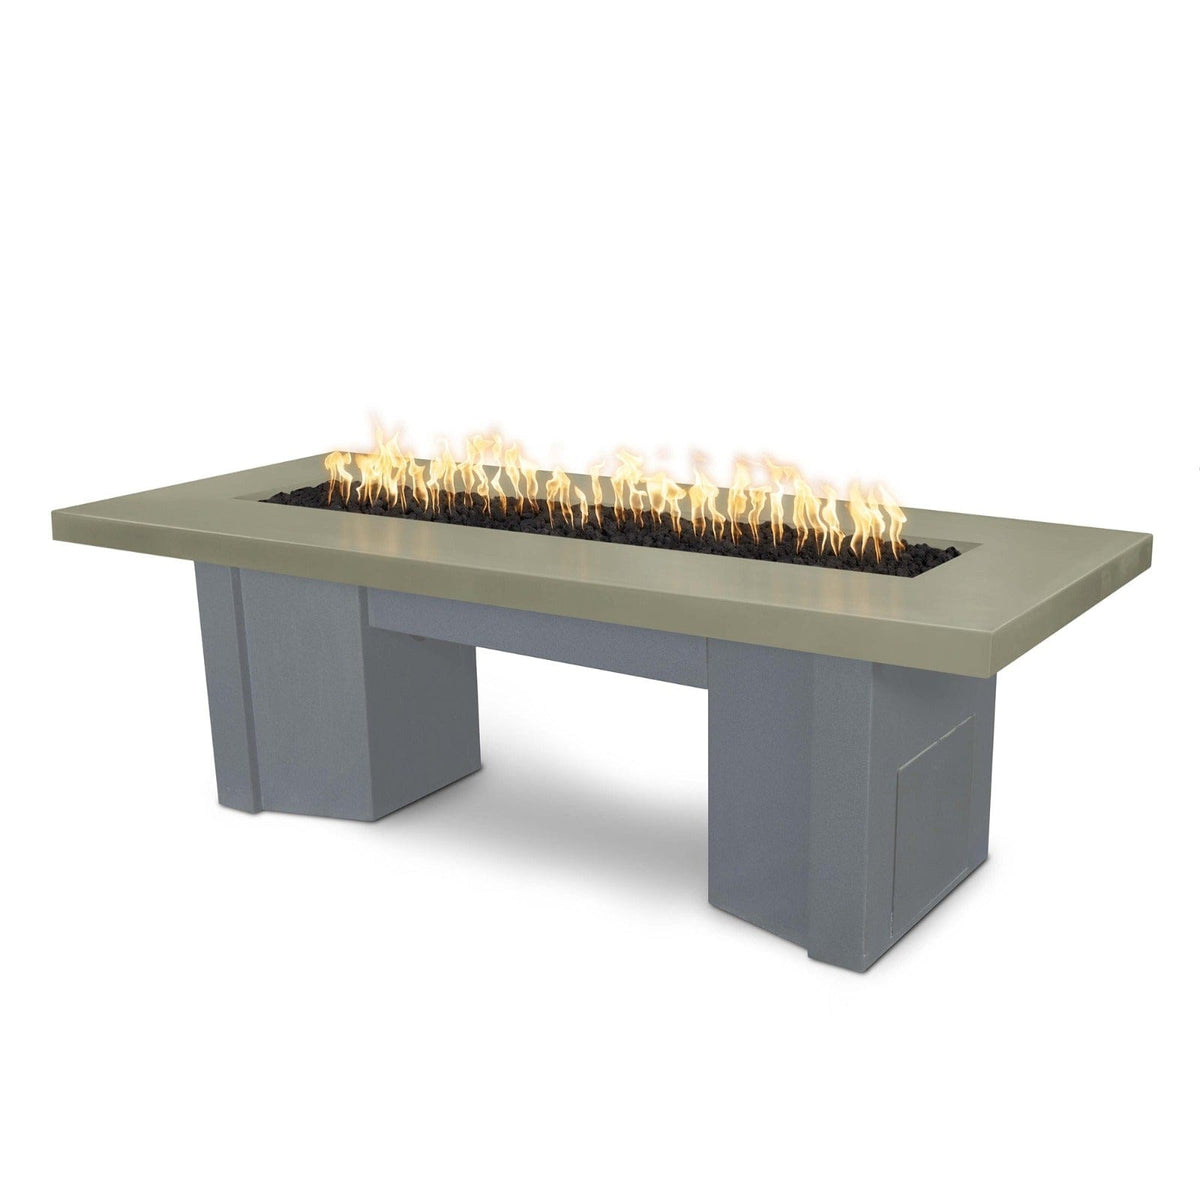 The Outdoor Plus Fire Features Ash (-ASH) / Gray Powder Coated Steel (-GRY) The Outdoor Plus 78&quot; Alameda Fire Table Smooth Concrete in Natural Gas - Flame Sense System with Push Button Spark Igniter / OPT-ALMGFRC78FSEN-NG